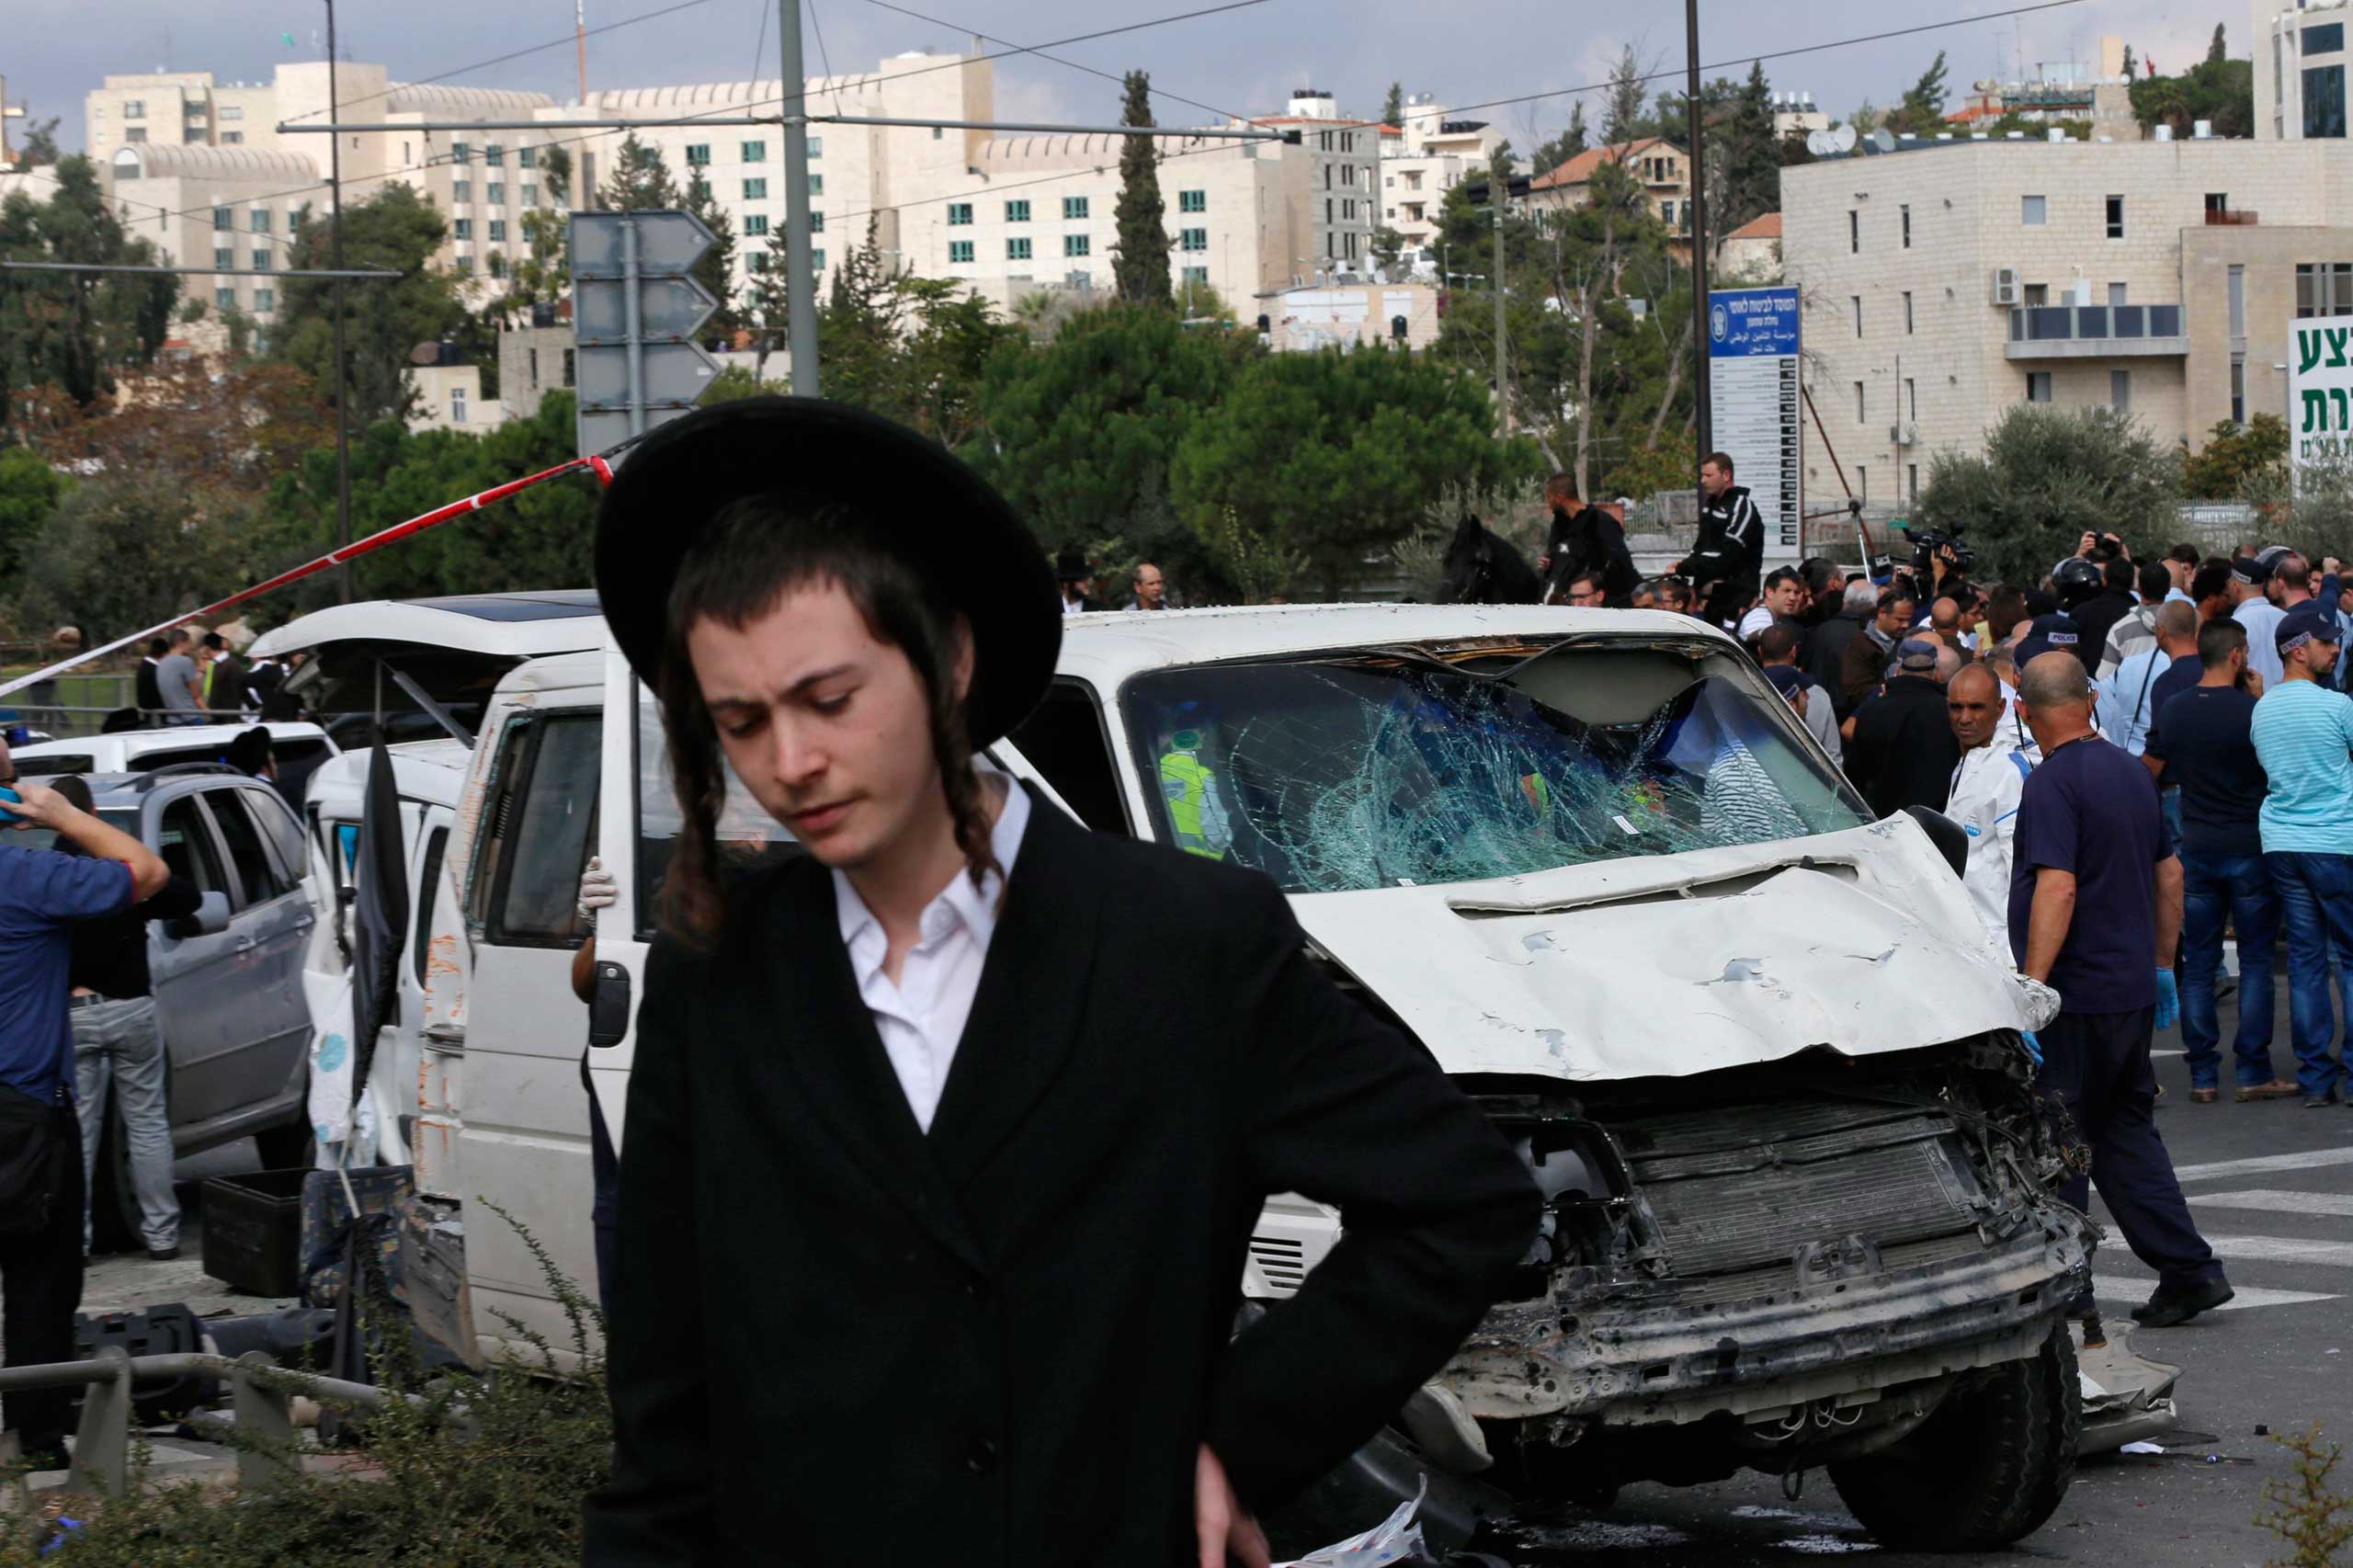 An ultra-Orthodox youth stands in front of the vehicle of a Palestinian motorist who rammed into pedestrians at the scene of an attack in Jerusalem, Nov. 5, 2014. (Ammar Awad—Reuters)